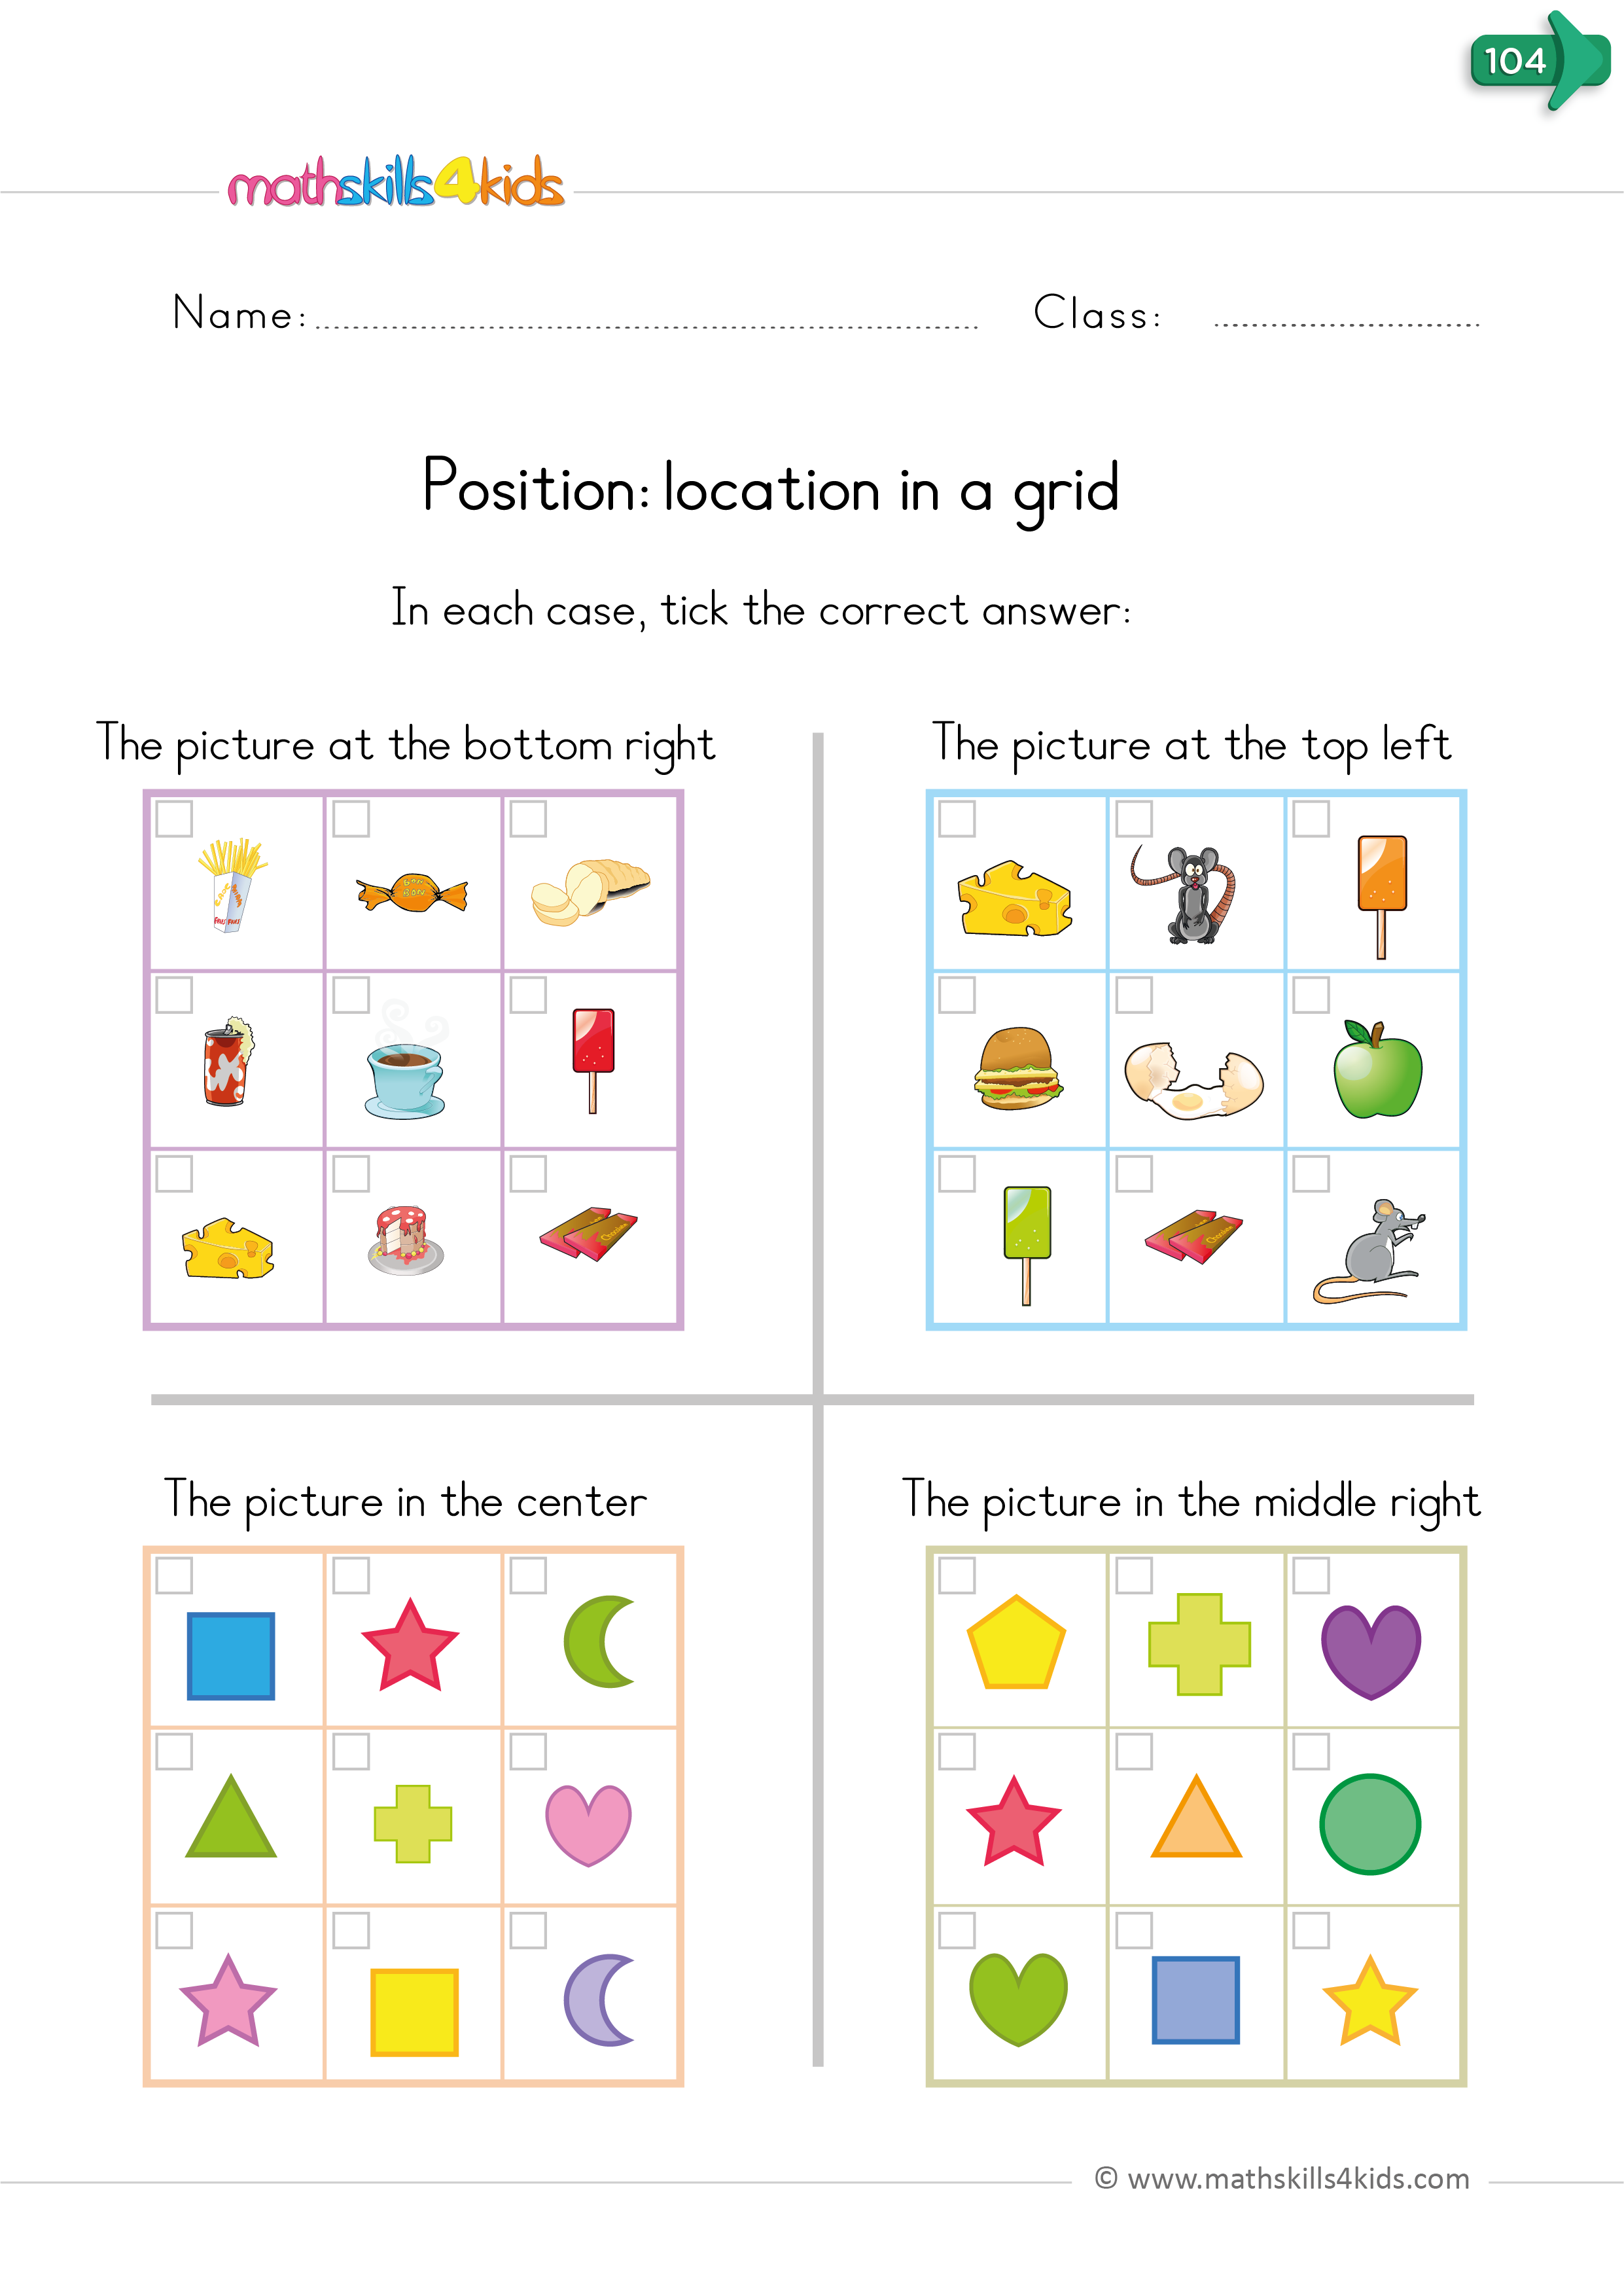 kindergarten math worksheets and activities - positional words grid location top-right, bottom center, etc.